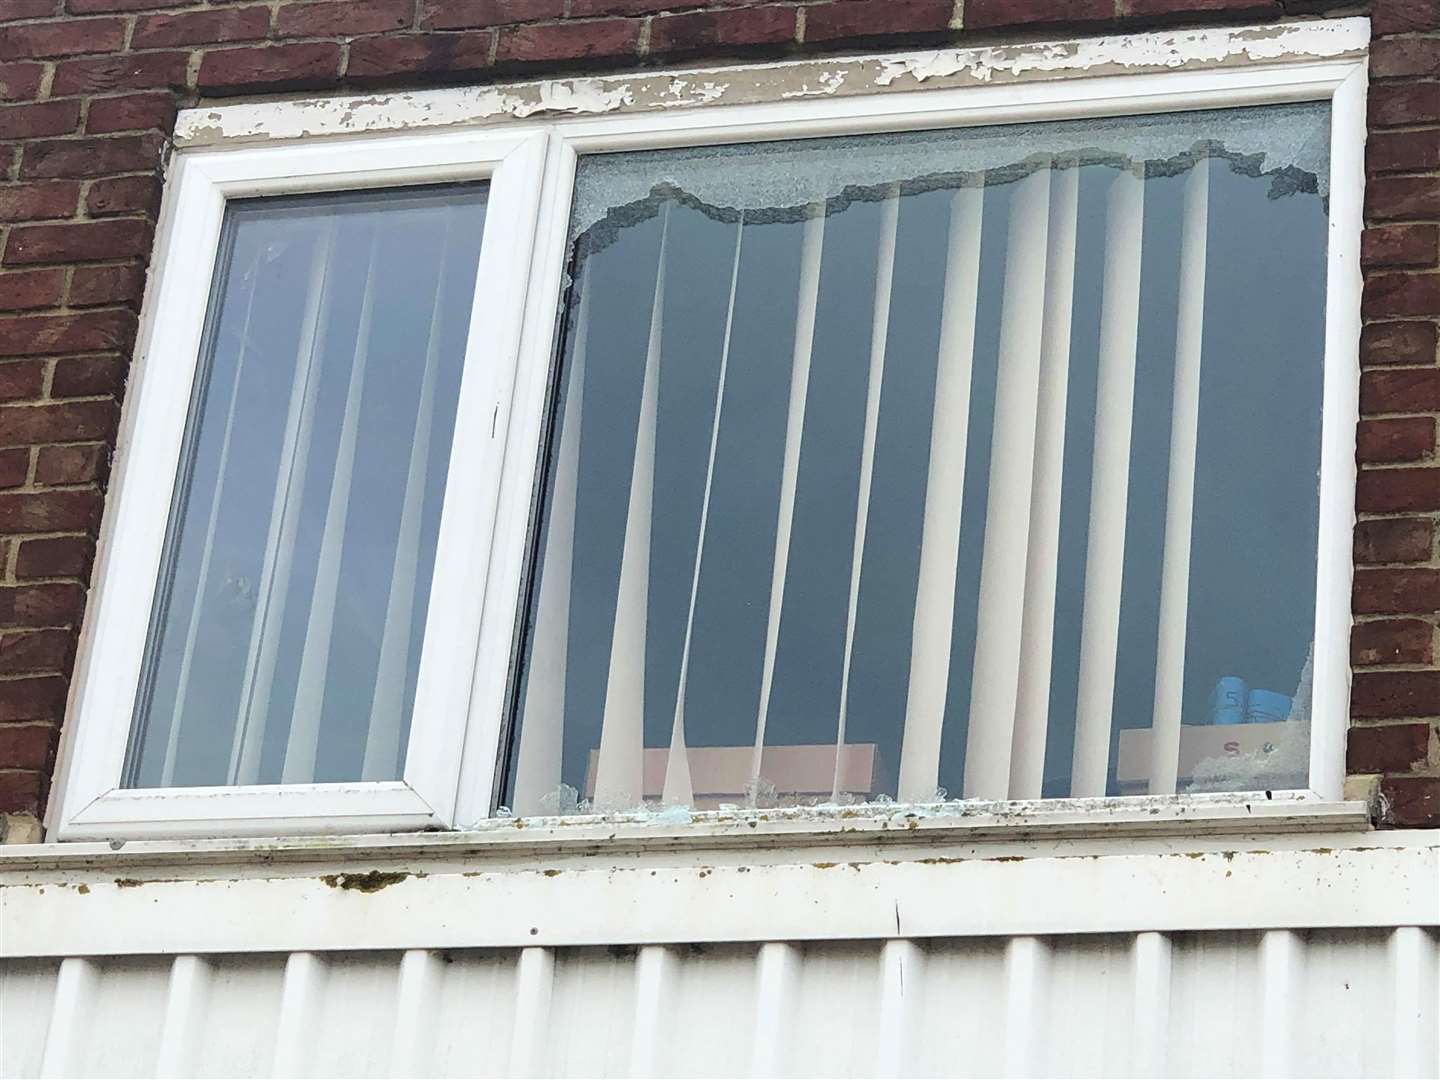 Mr Bones believes it cost him as much as £400 to repair and replace the damaged windows